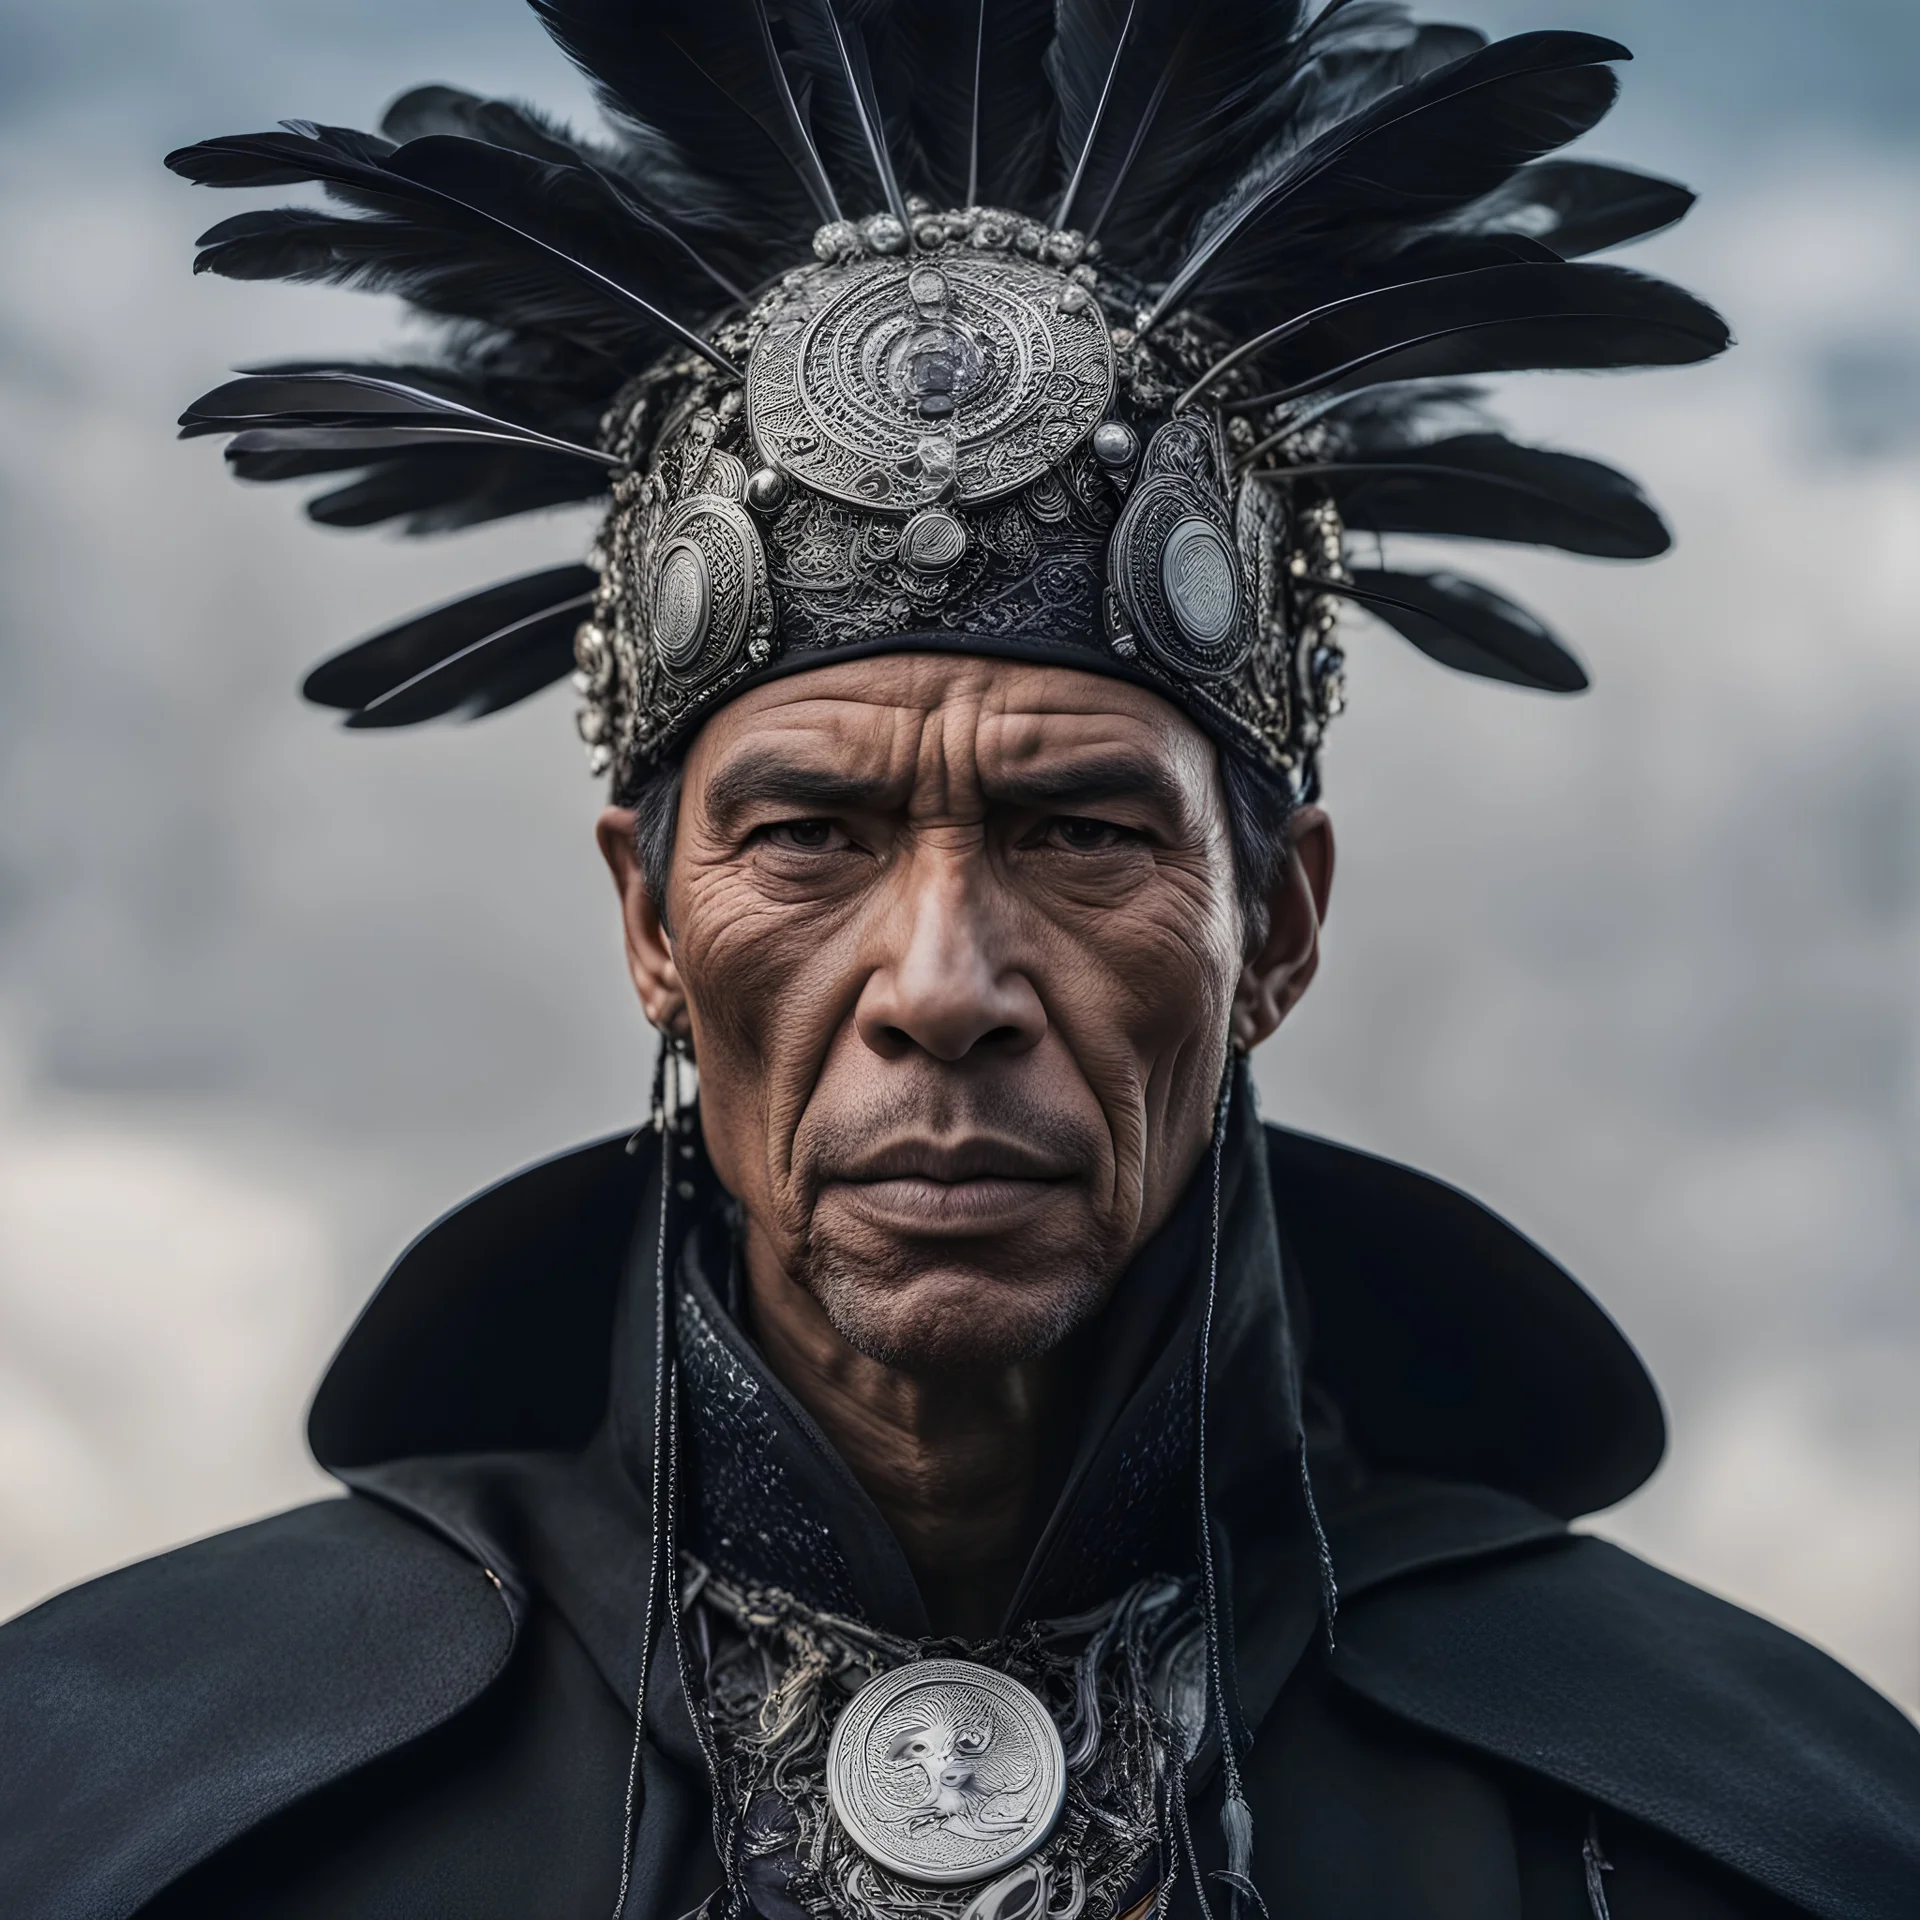 Highly detailed photo of a tribal man adorned with a feather headdress and a black cape. The man is portrayed in a Jean Giraud style, with influences from artists Adam Paquette, Ruan Jia, and Joao Ruas. The setting showcases a ceremonial atmosphere, with the man looking to his right. The photo captures the intricate tribal painting on his face and presents a powerful visual narrative. The resolution of the image is 4K, and it is a masterpiece featured on Artstation.